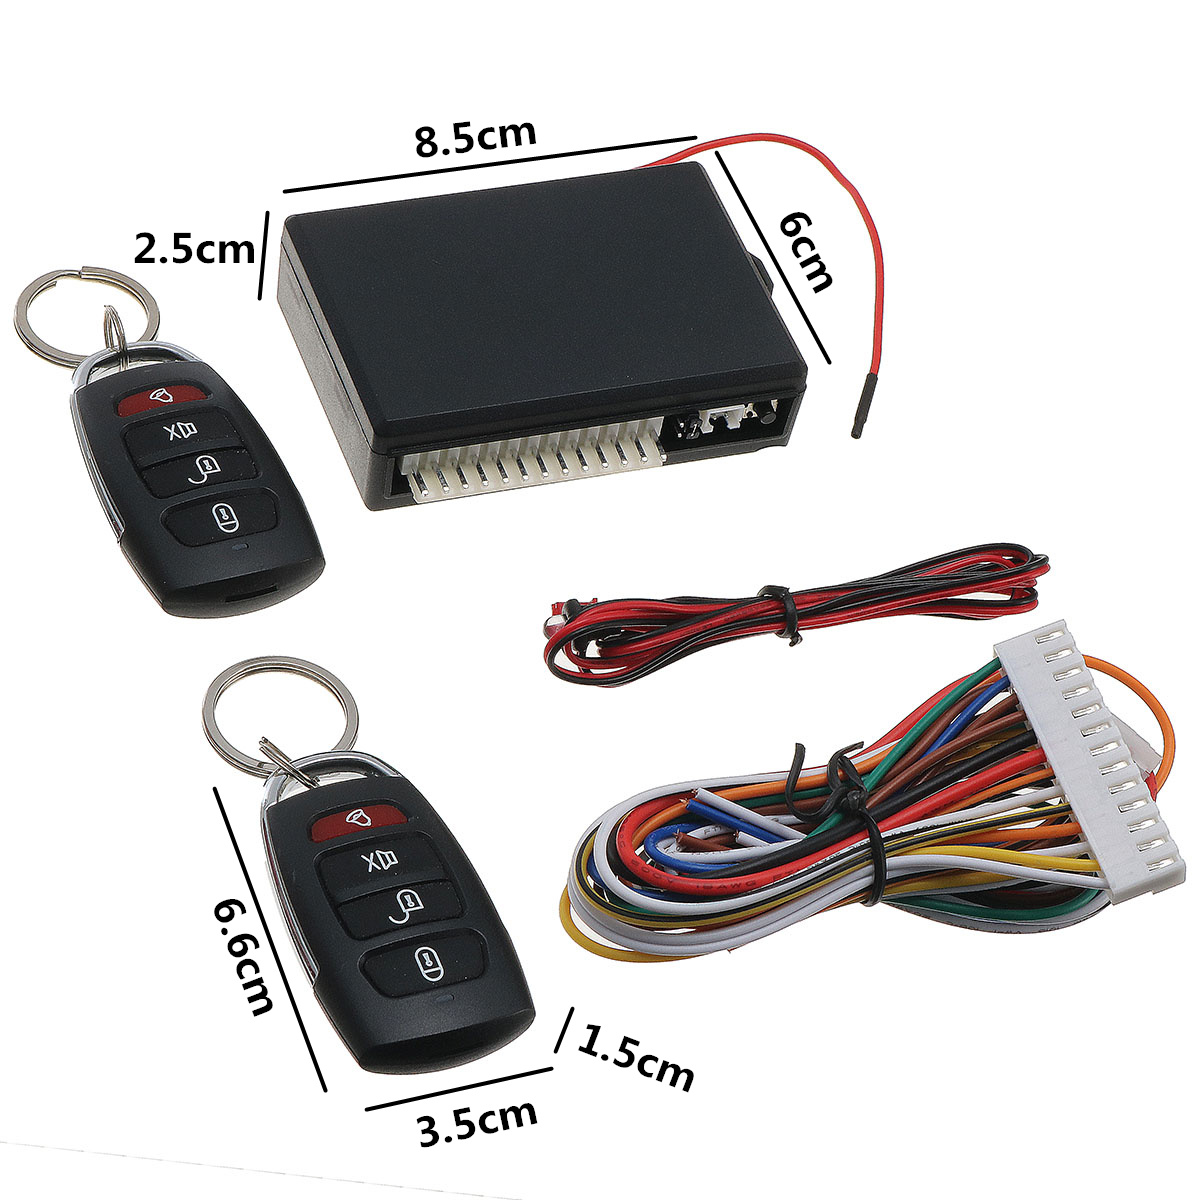 Car-Auto-Remote-Centrol-Kit-Door-Lock-Vehicle-Keyless-Entry-System-With-2-Remotes-1171601